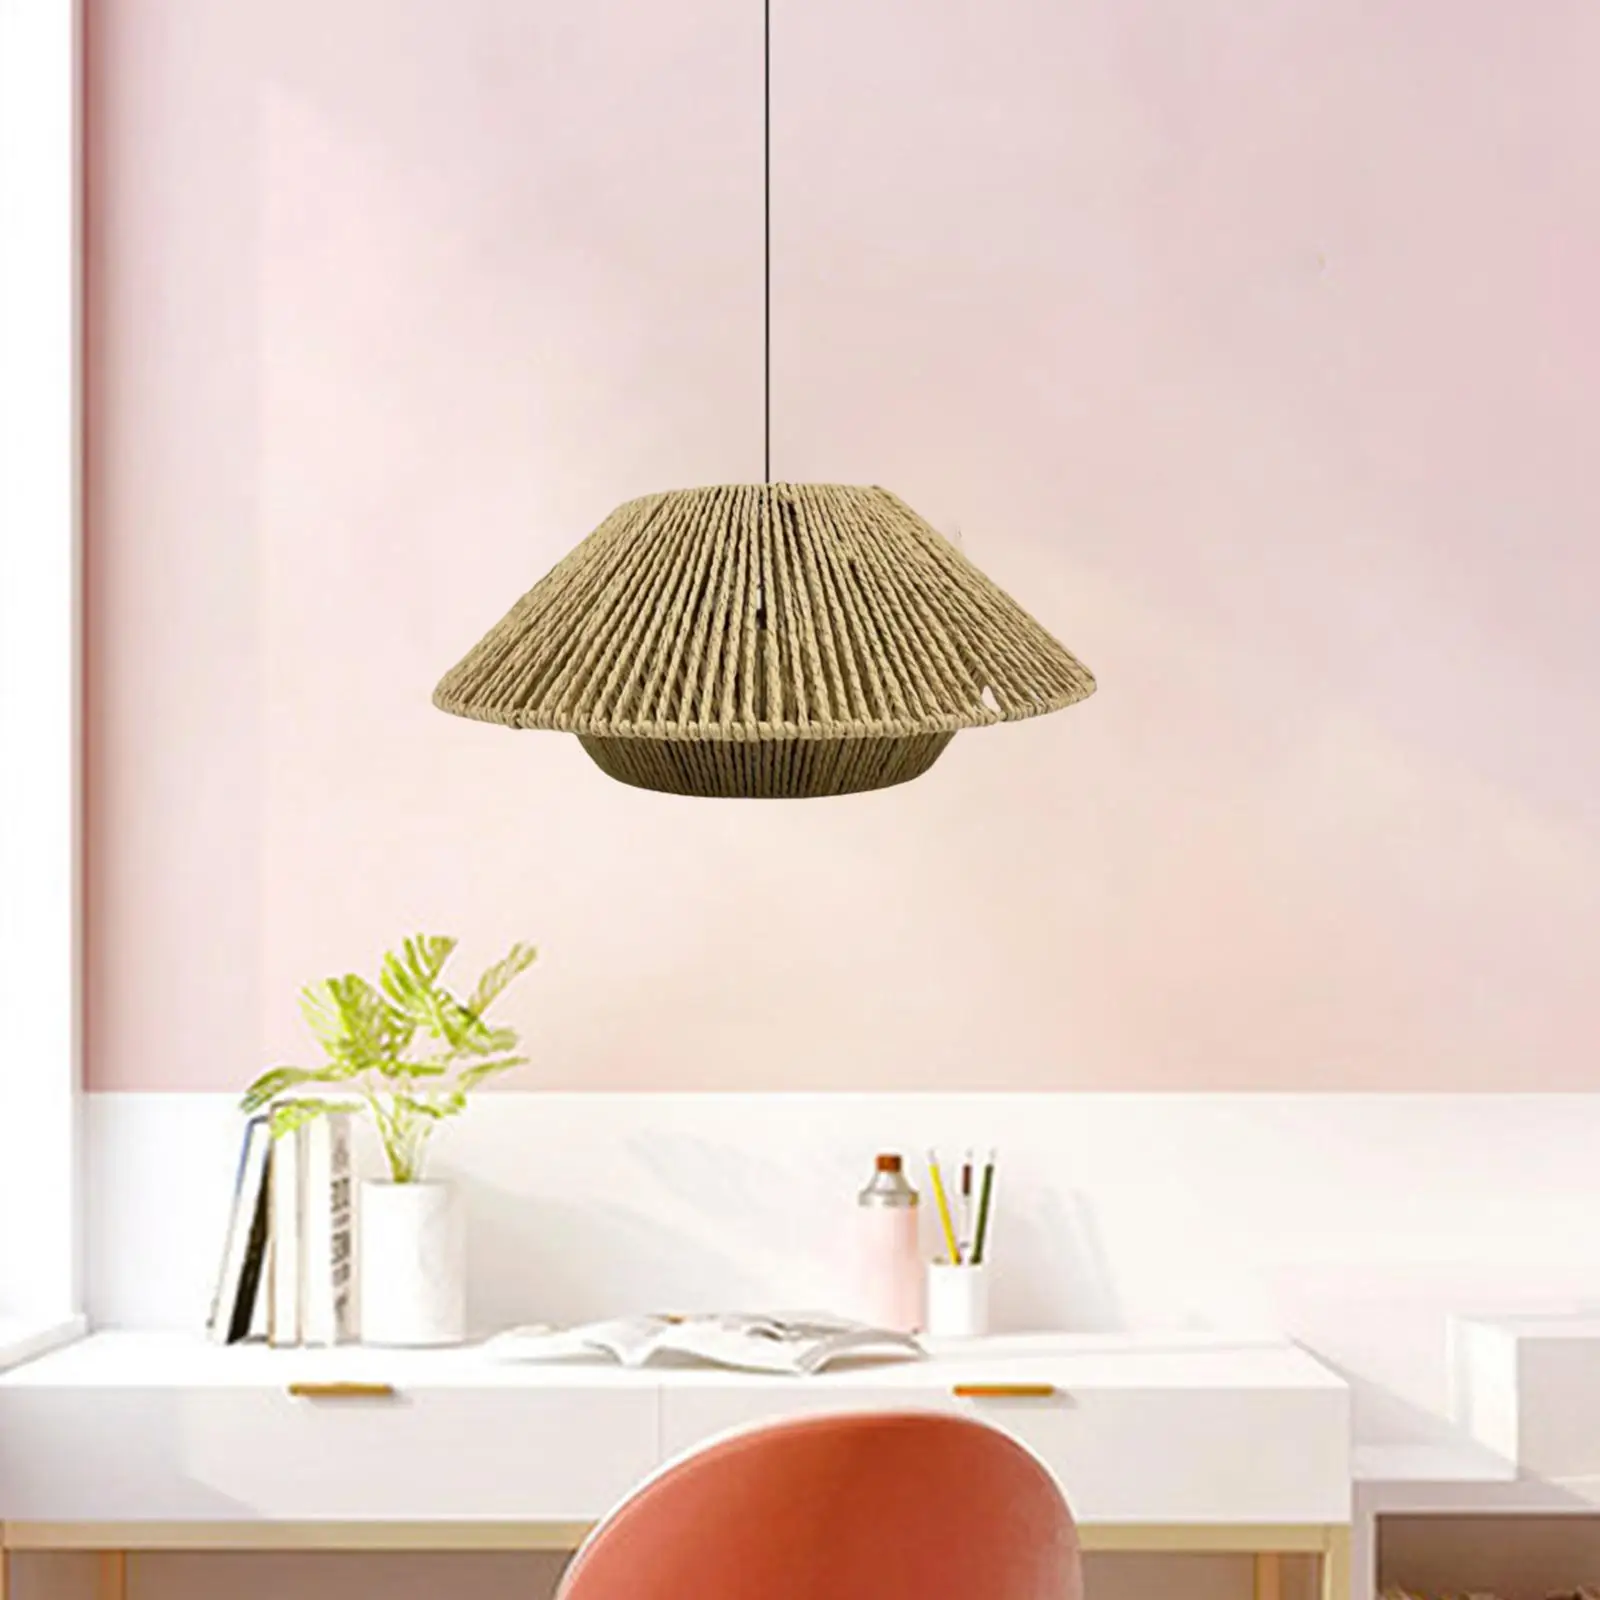 Ceiling Light Fixture Cover Ornament Droplight Floor Lamp Pendant Lamp Shades Woven Rope Lampshade for Restaurant Living Room